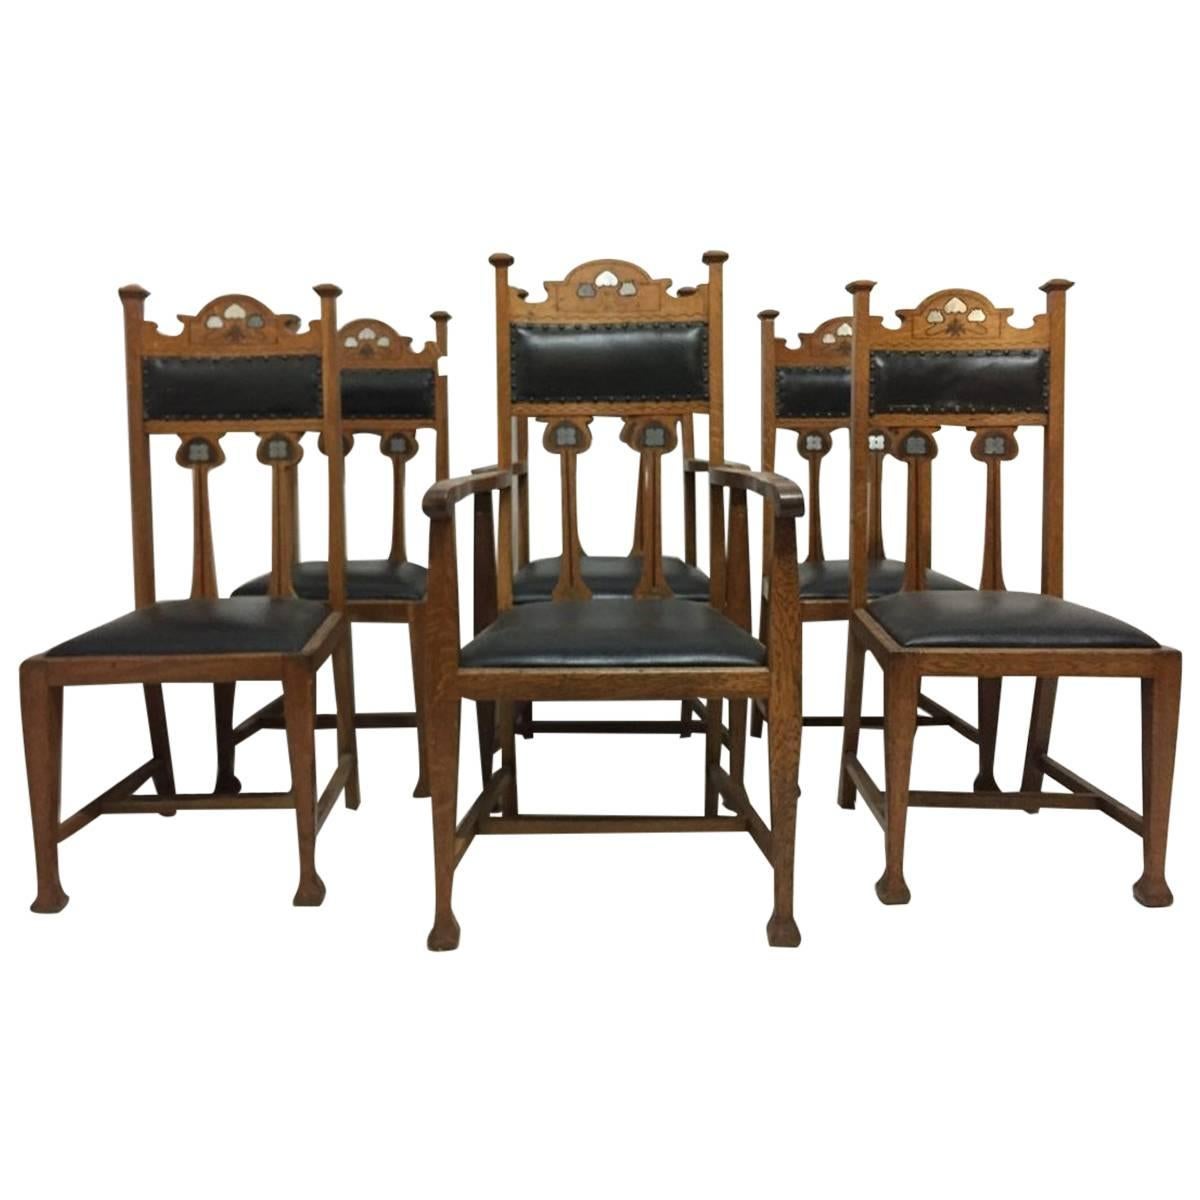 Set of Six Arts & Crafts Chairs with Stylized Floral Inlays Using Pewter Ebony